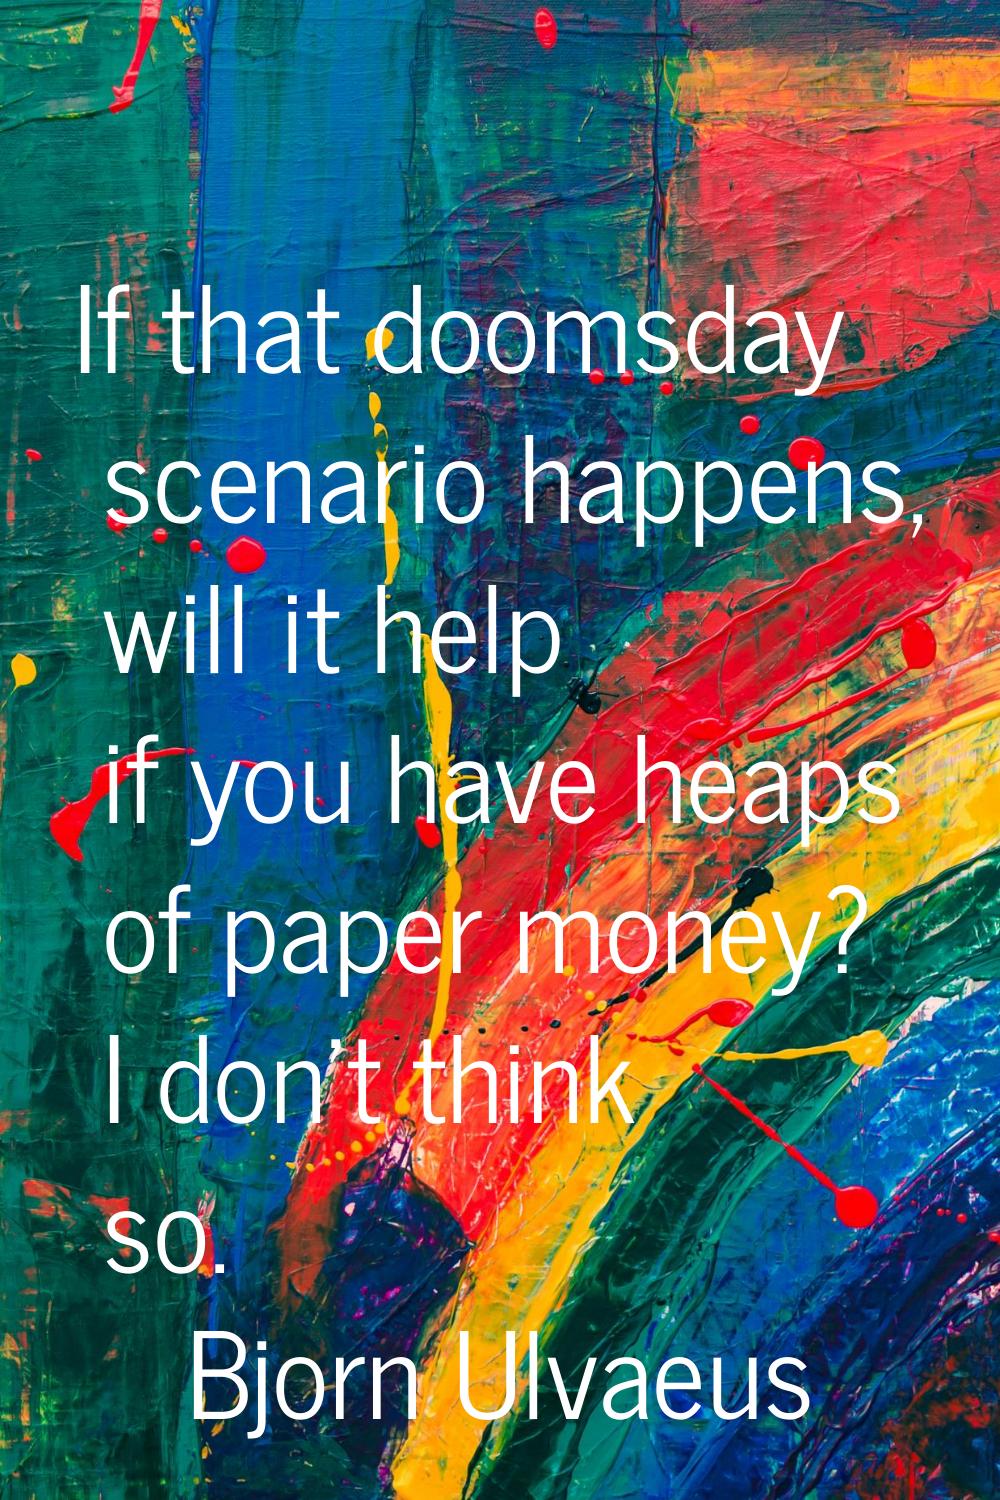 If that doomsday scenario happens, will it help if you have heaps of paper money? I don't think so.